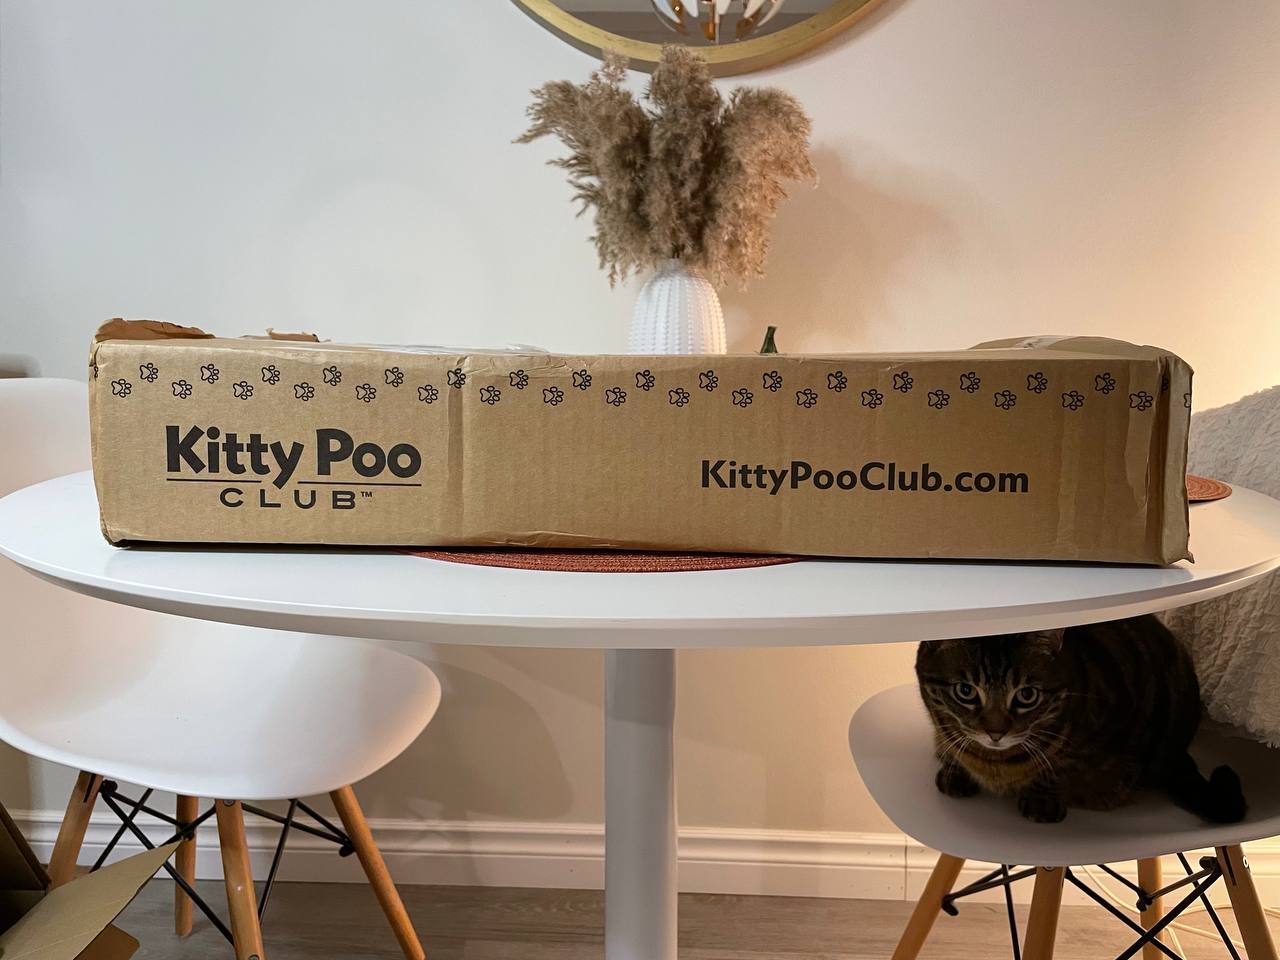 Kitty Poo Club litter box received in the cardboard